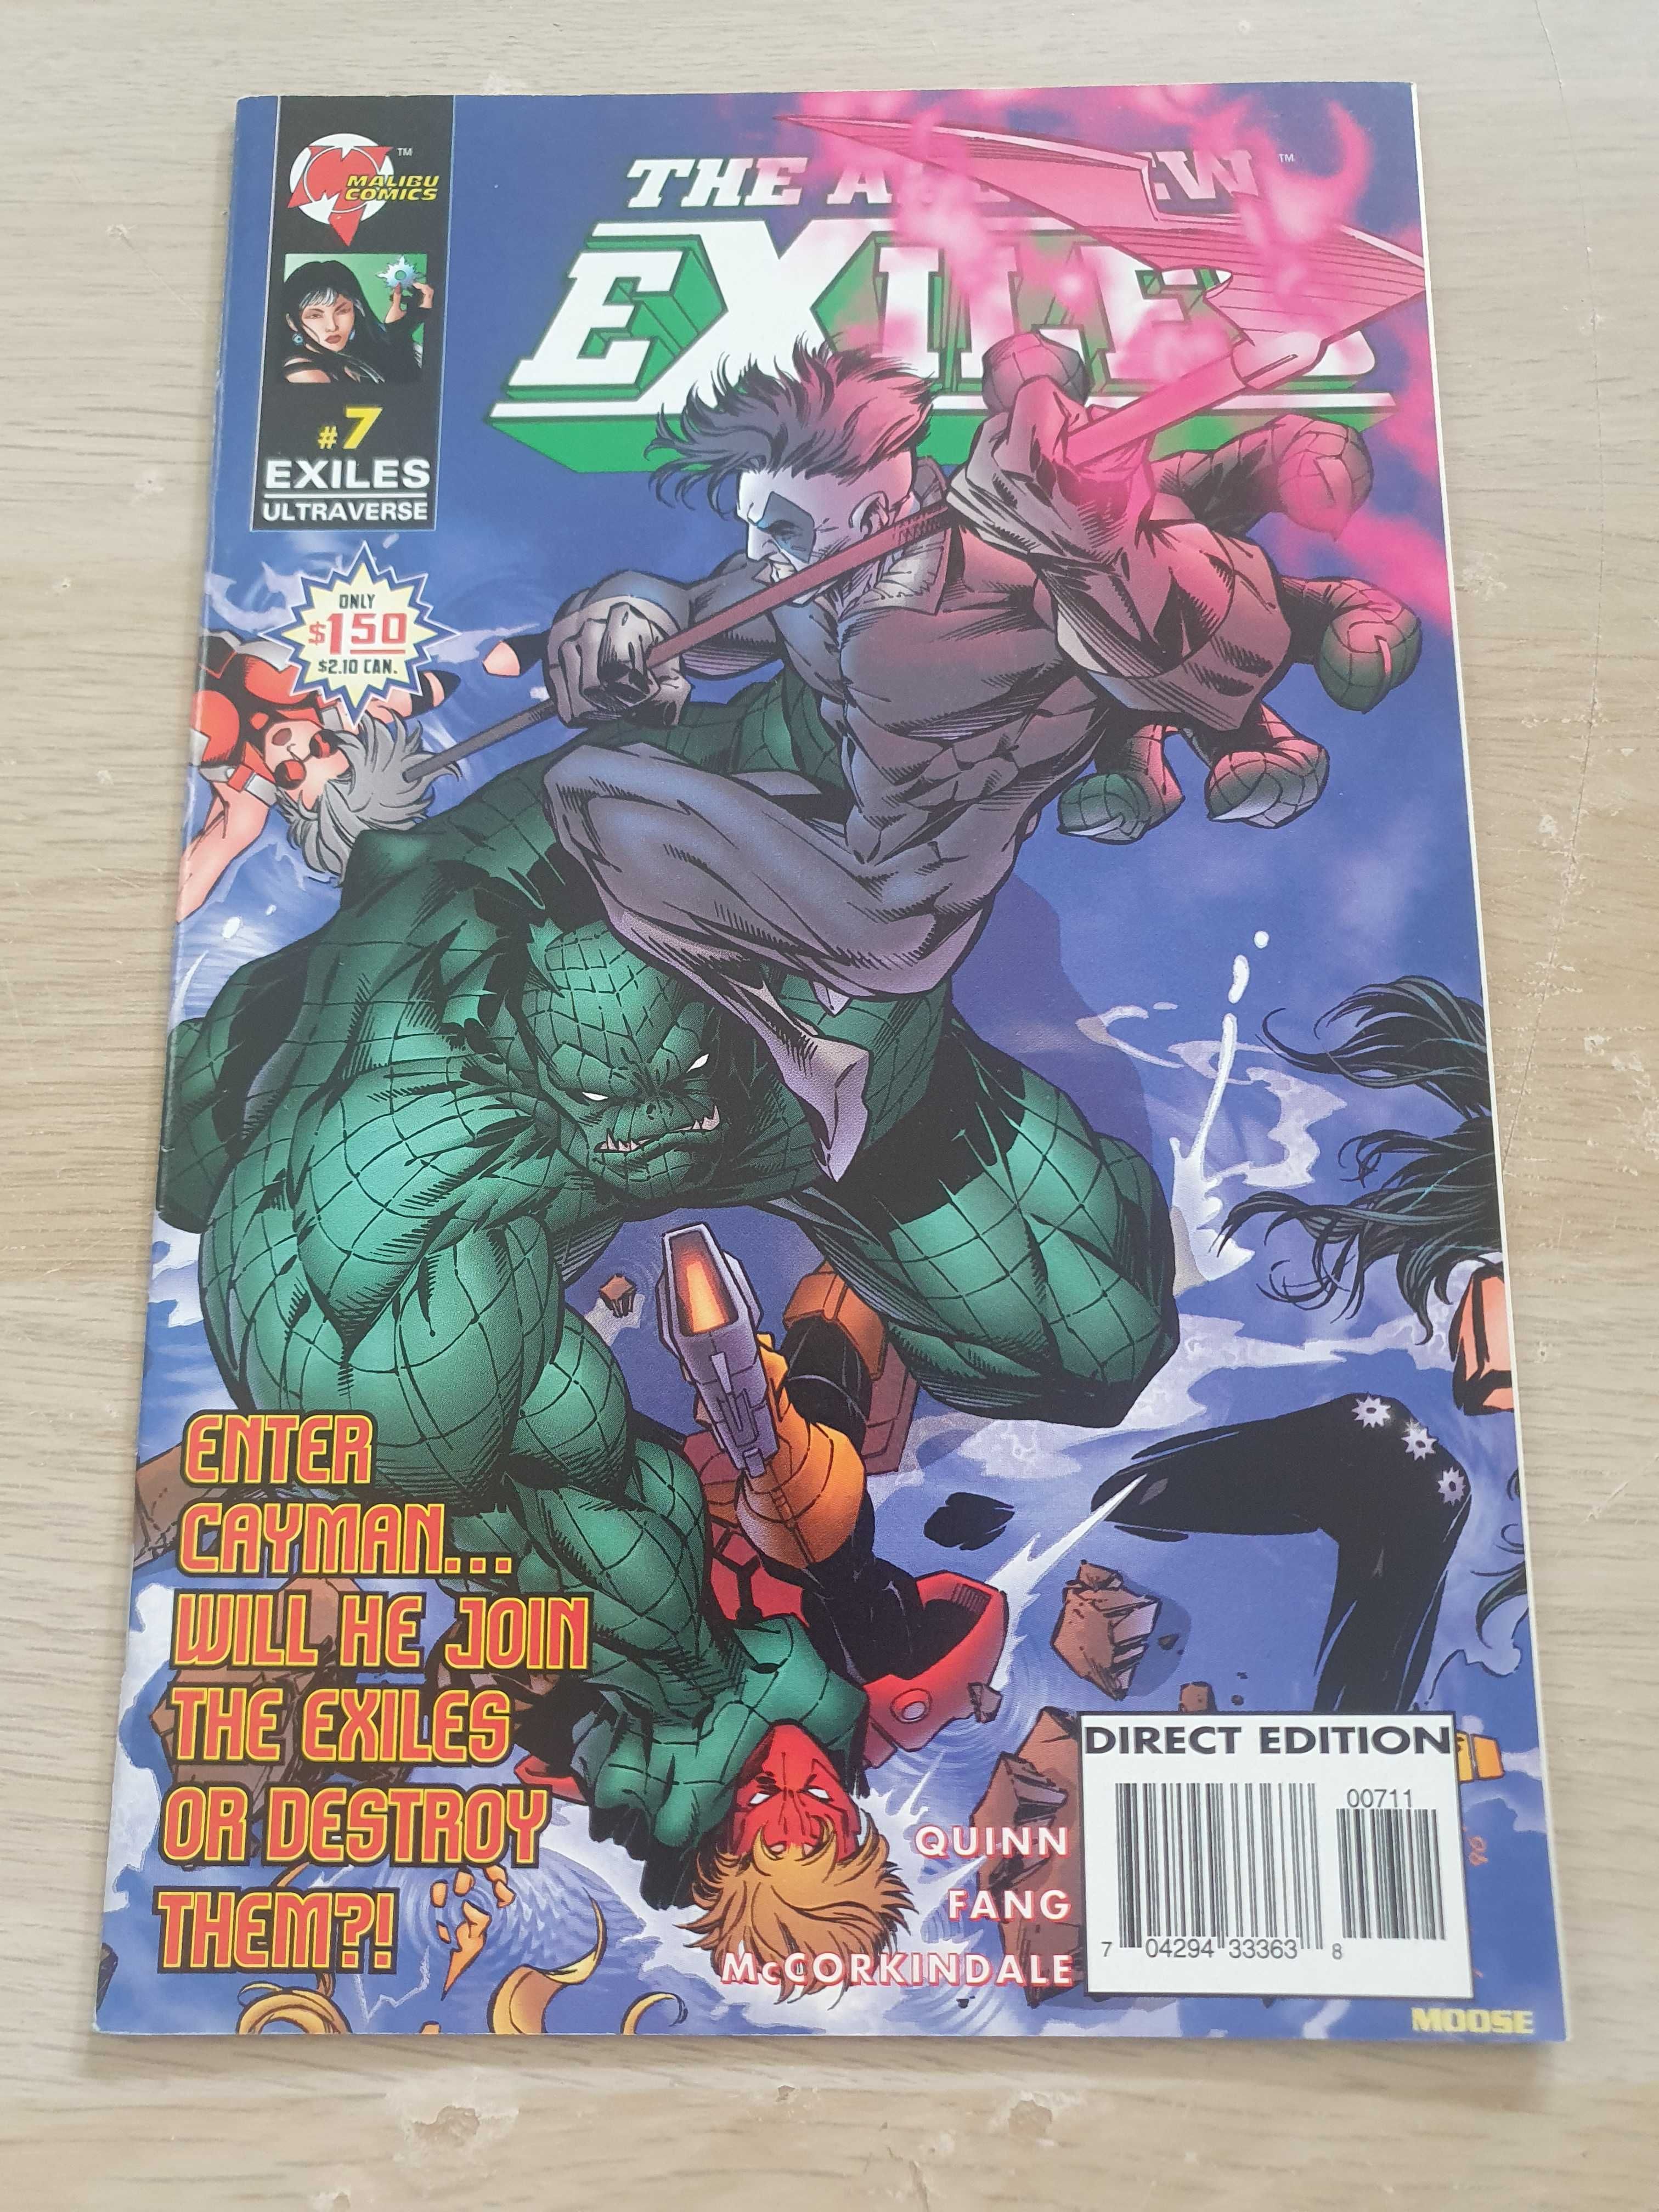 Exiles mix  The all new Exiles; Exiles 8 Ultraforce/Spider-man (ZM147)